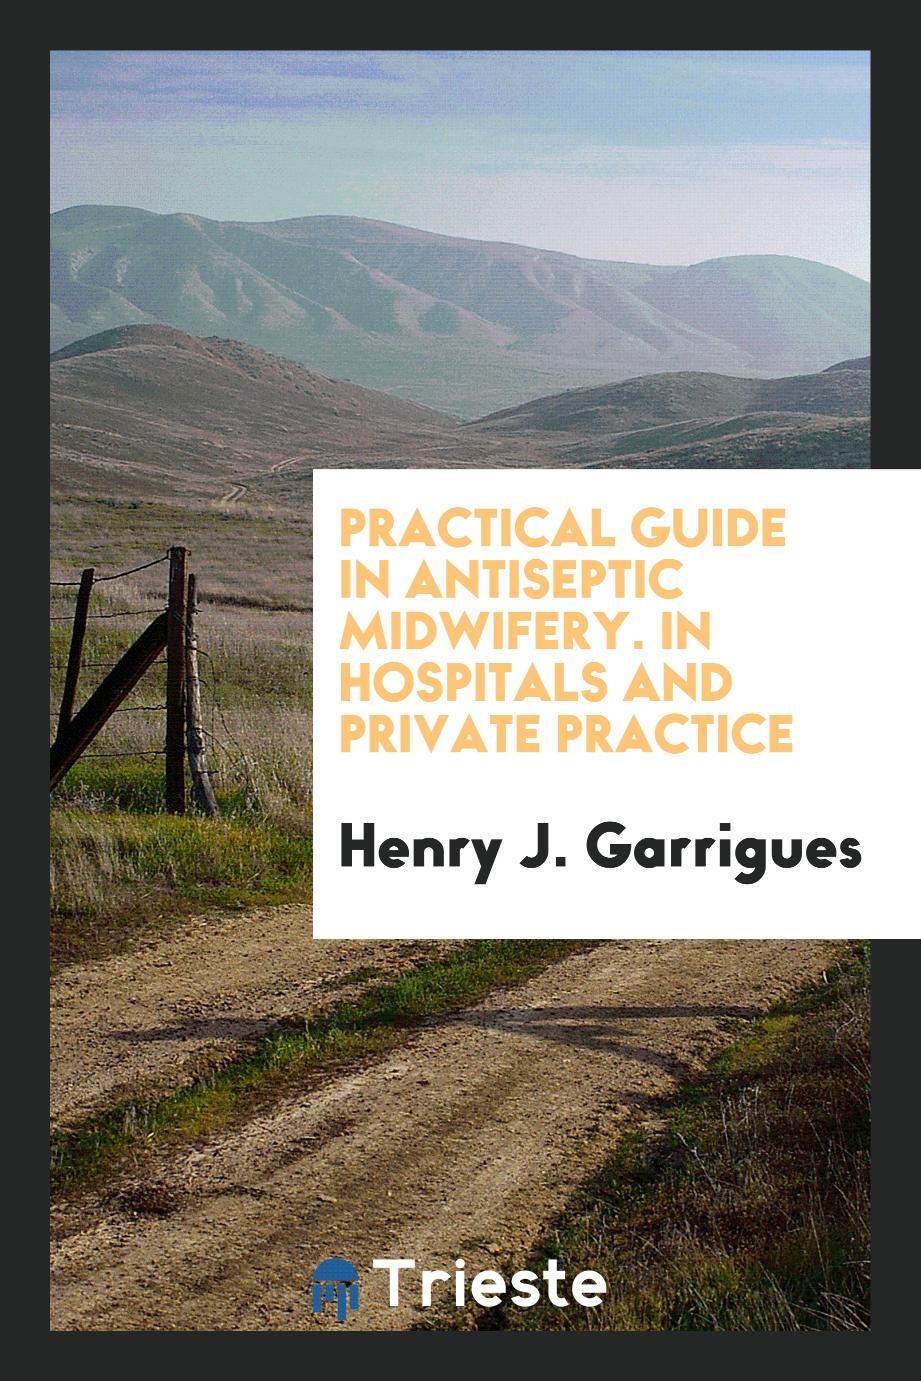 Practical Guide in Antiseptic Midwifery. In Hospitals and Private Practice